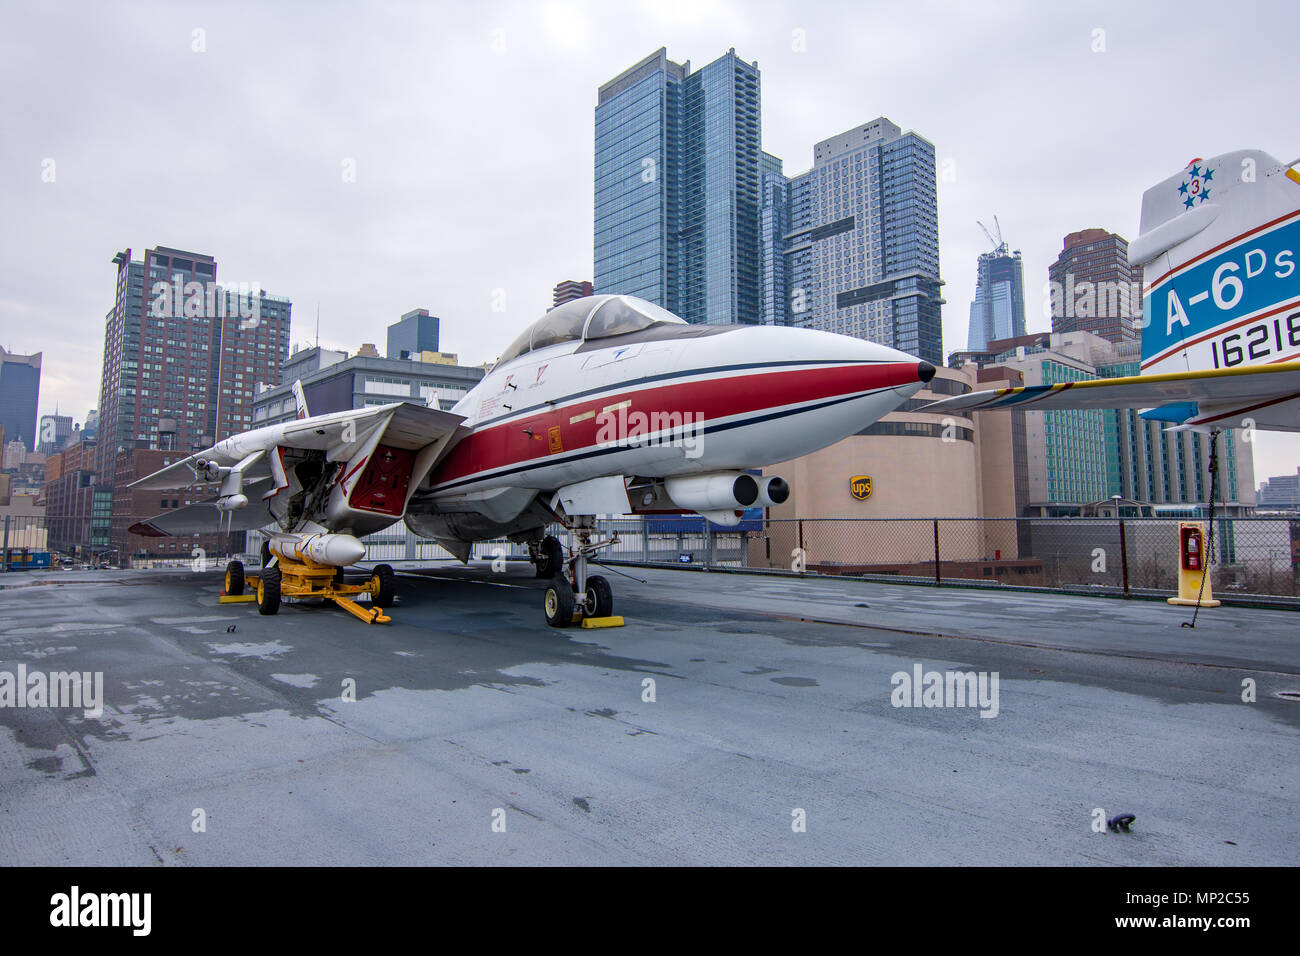 New York, US - March 30, 2018: The F-14 tomcat fighter plane as seen on the deck of the Intrepid air and sea museum in Manhattan Stock Photo